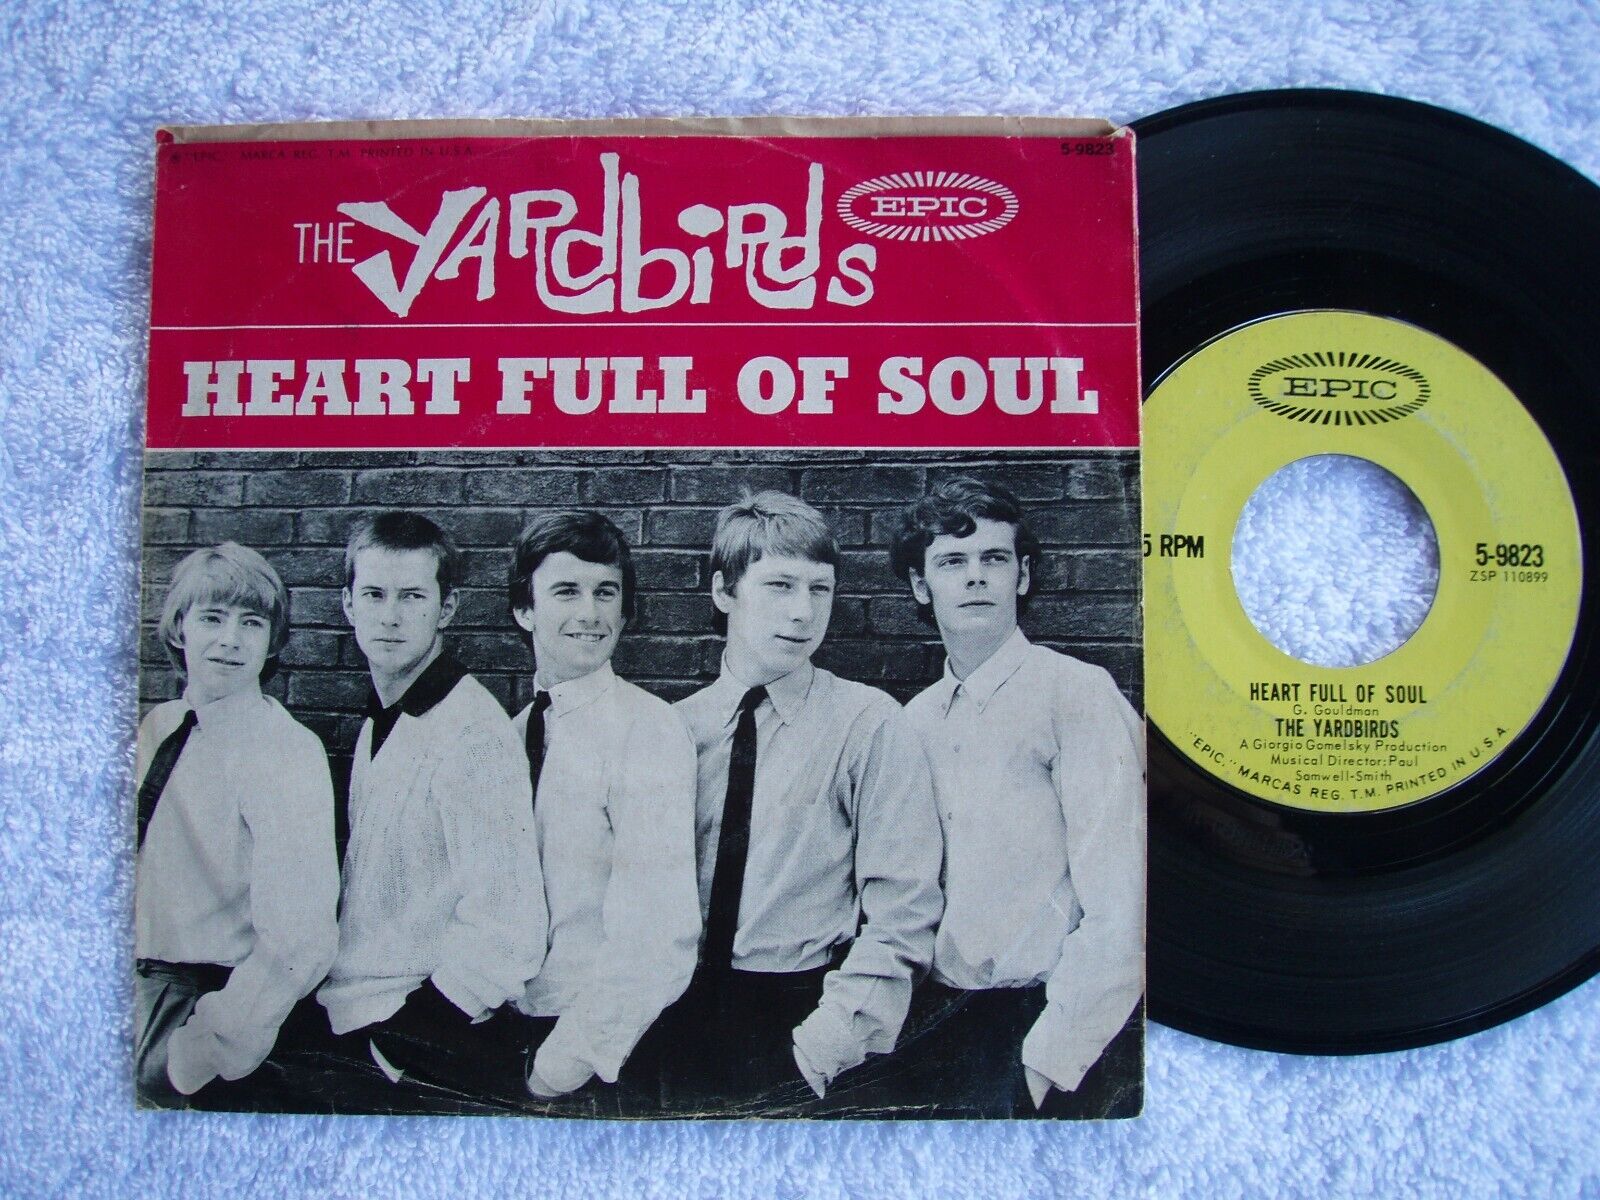 ~~THE YARDBIRDS~~HEART FULL OF SOUL~~STEELED BLUES~~EPIC~~PICTURE SLEEVE ONLY~~